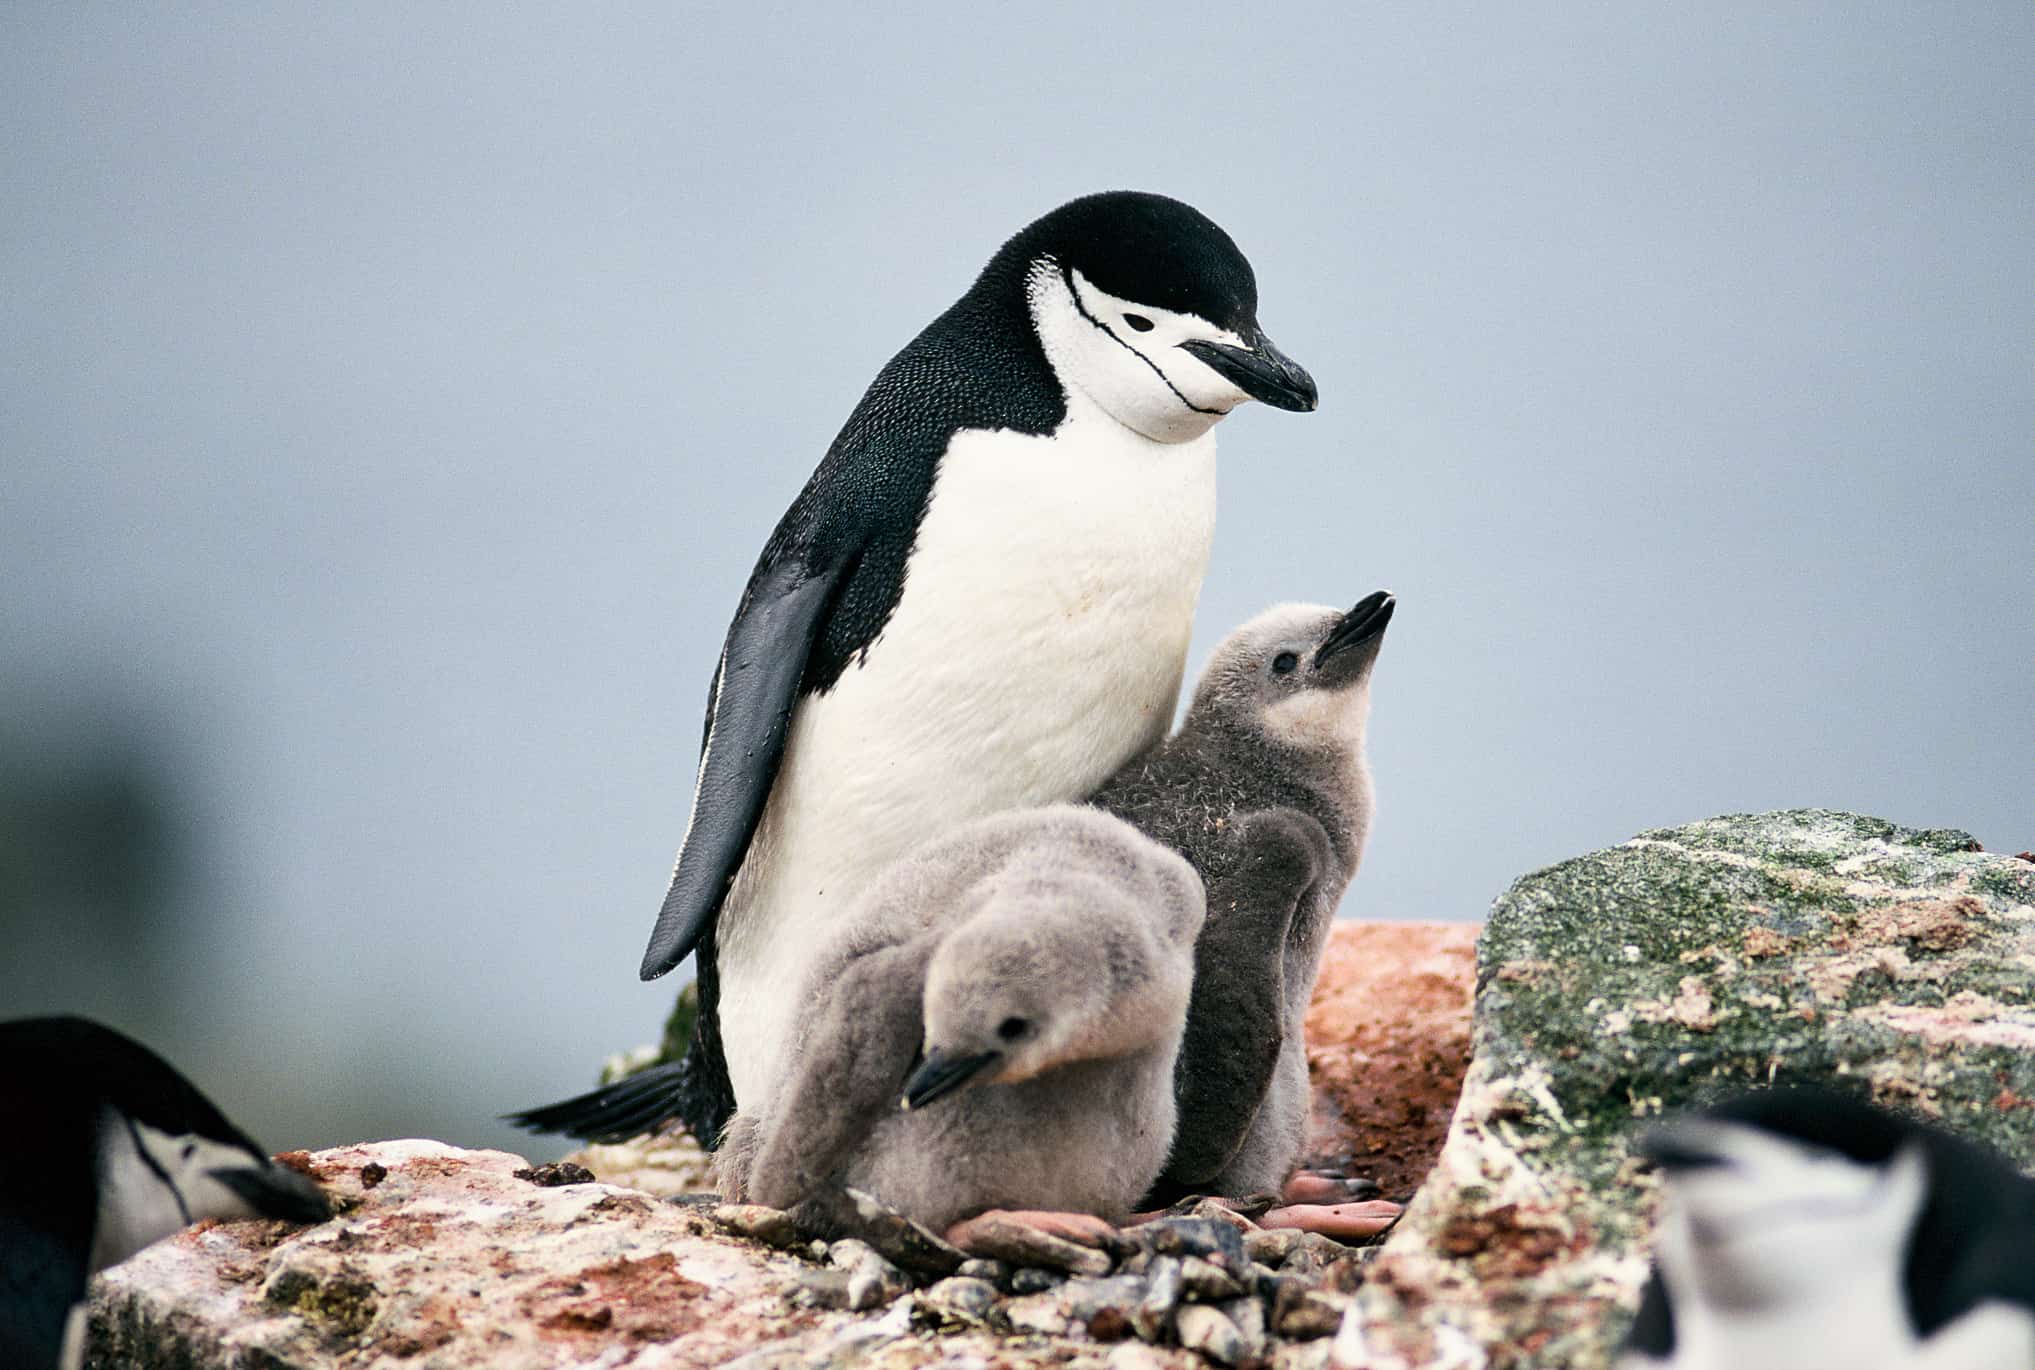 Microsleeping penguins nap hundreds of occasions a day